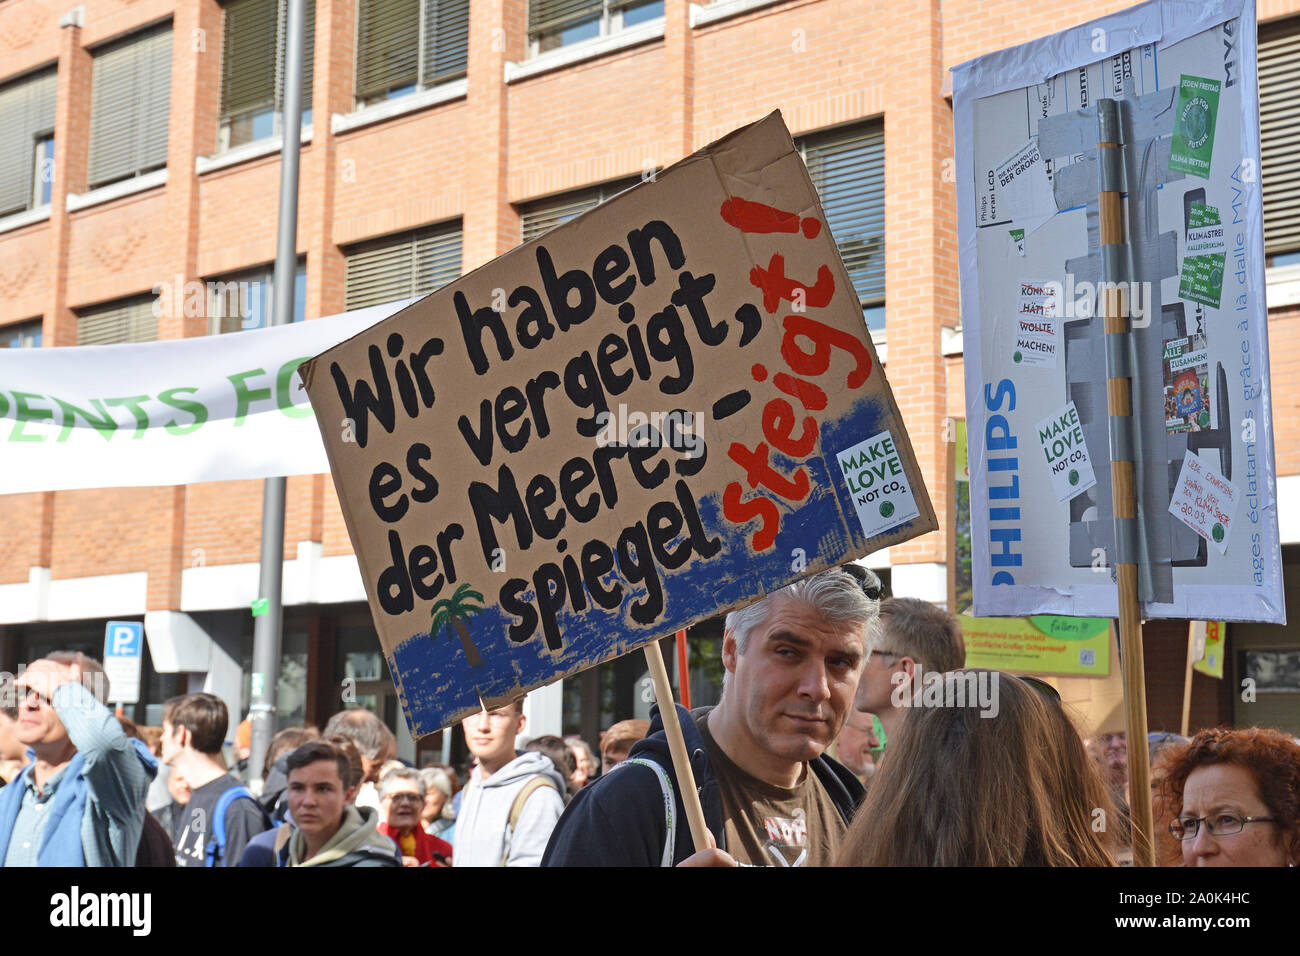 Demonstration during Global Climate Strike with cardboard banner and German slogan saying 'We've blown it, the sea level is rising' Stock Photo